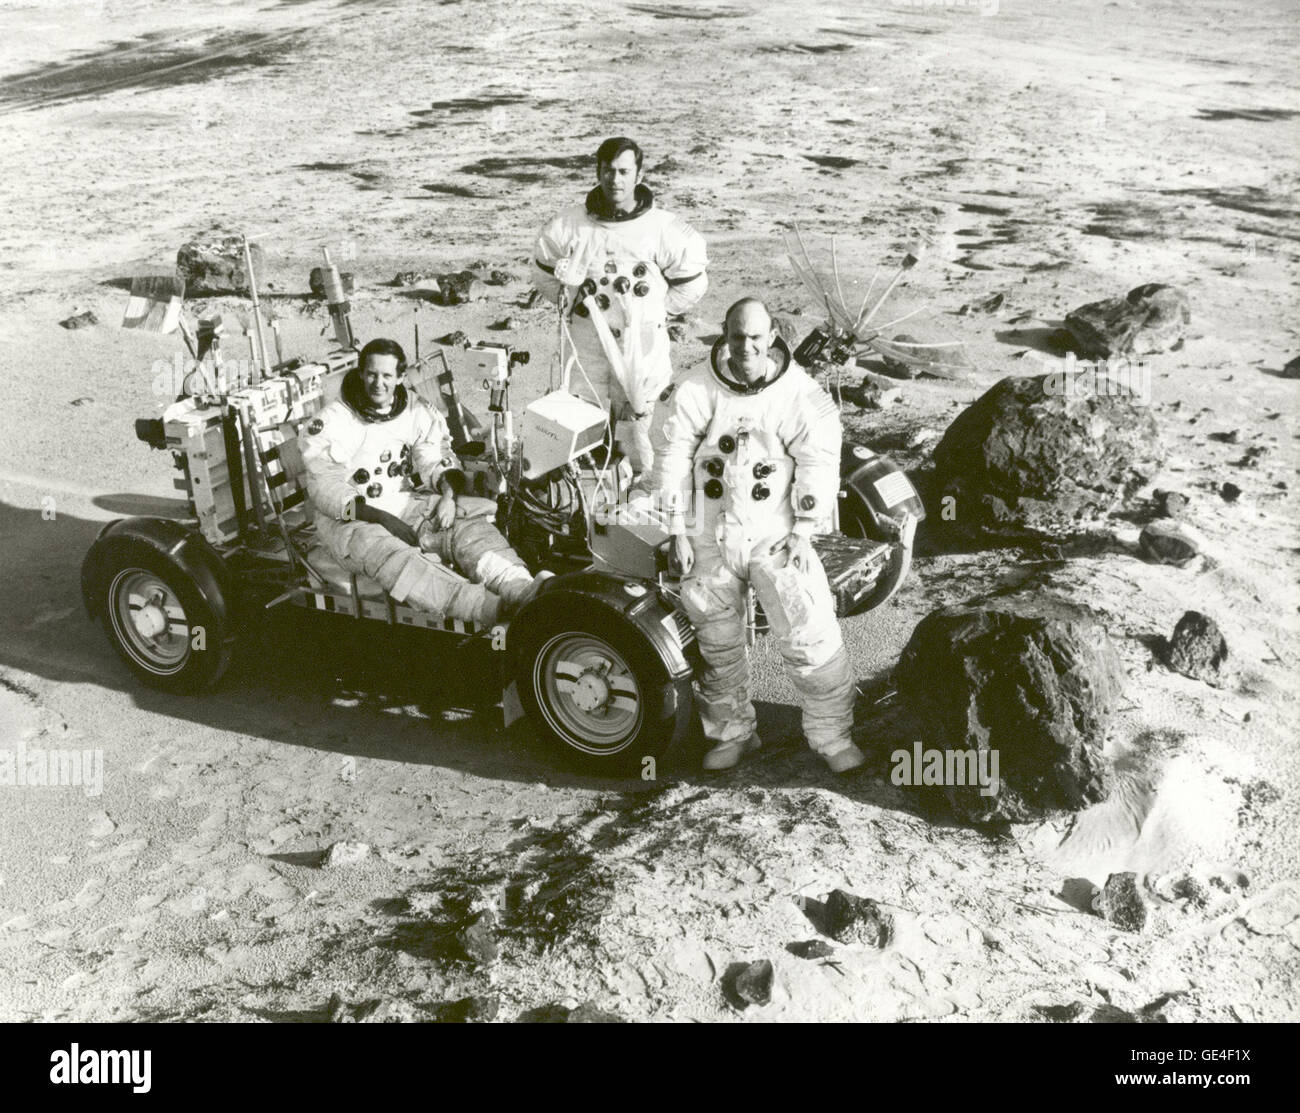 Apollo 16 astronauts (left to right), Lunar Module Pilot Charles M. Duke, Commander John W. Young, and Command Module Pilot Thomas K. Mattingly II during a training exercise in preparation for the Lunar Landing Mission.  Image # : 72-h-249 Date: February 6, 1972 Stock Photo